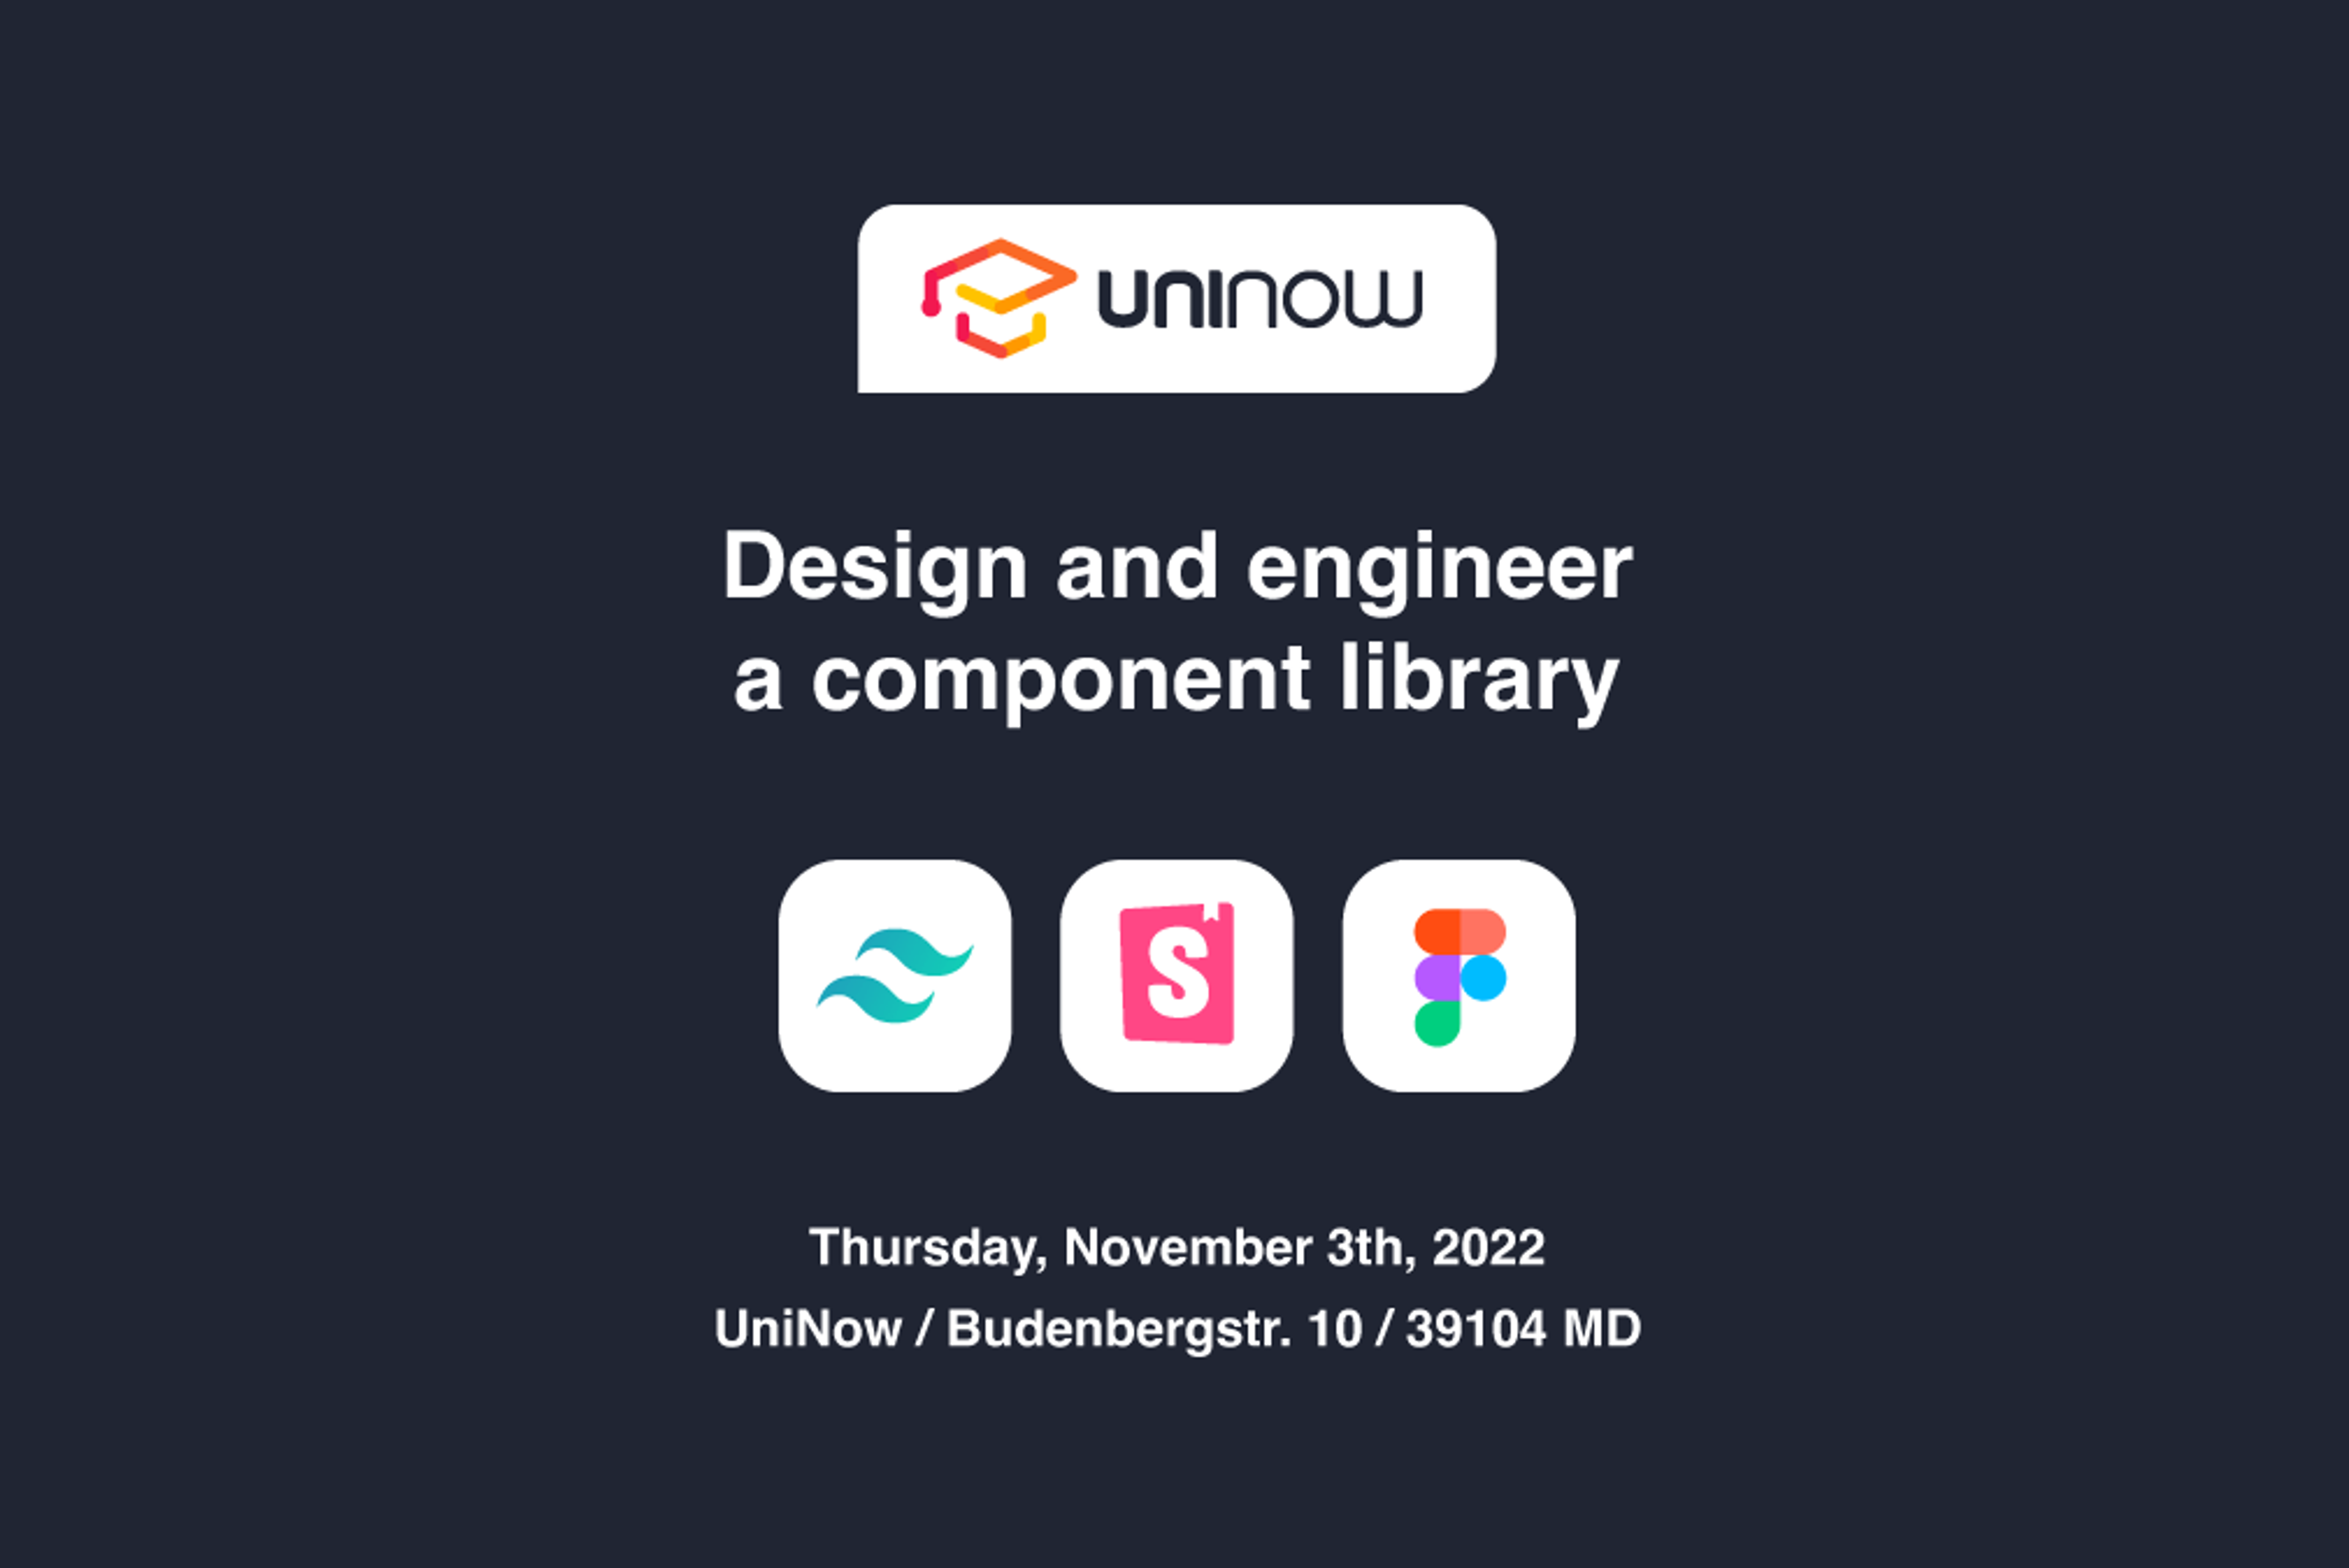 Design and engineer a component library